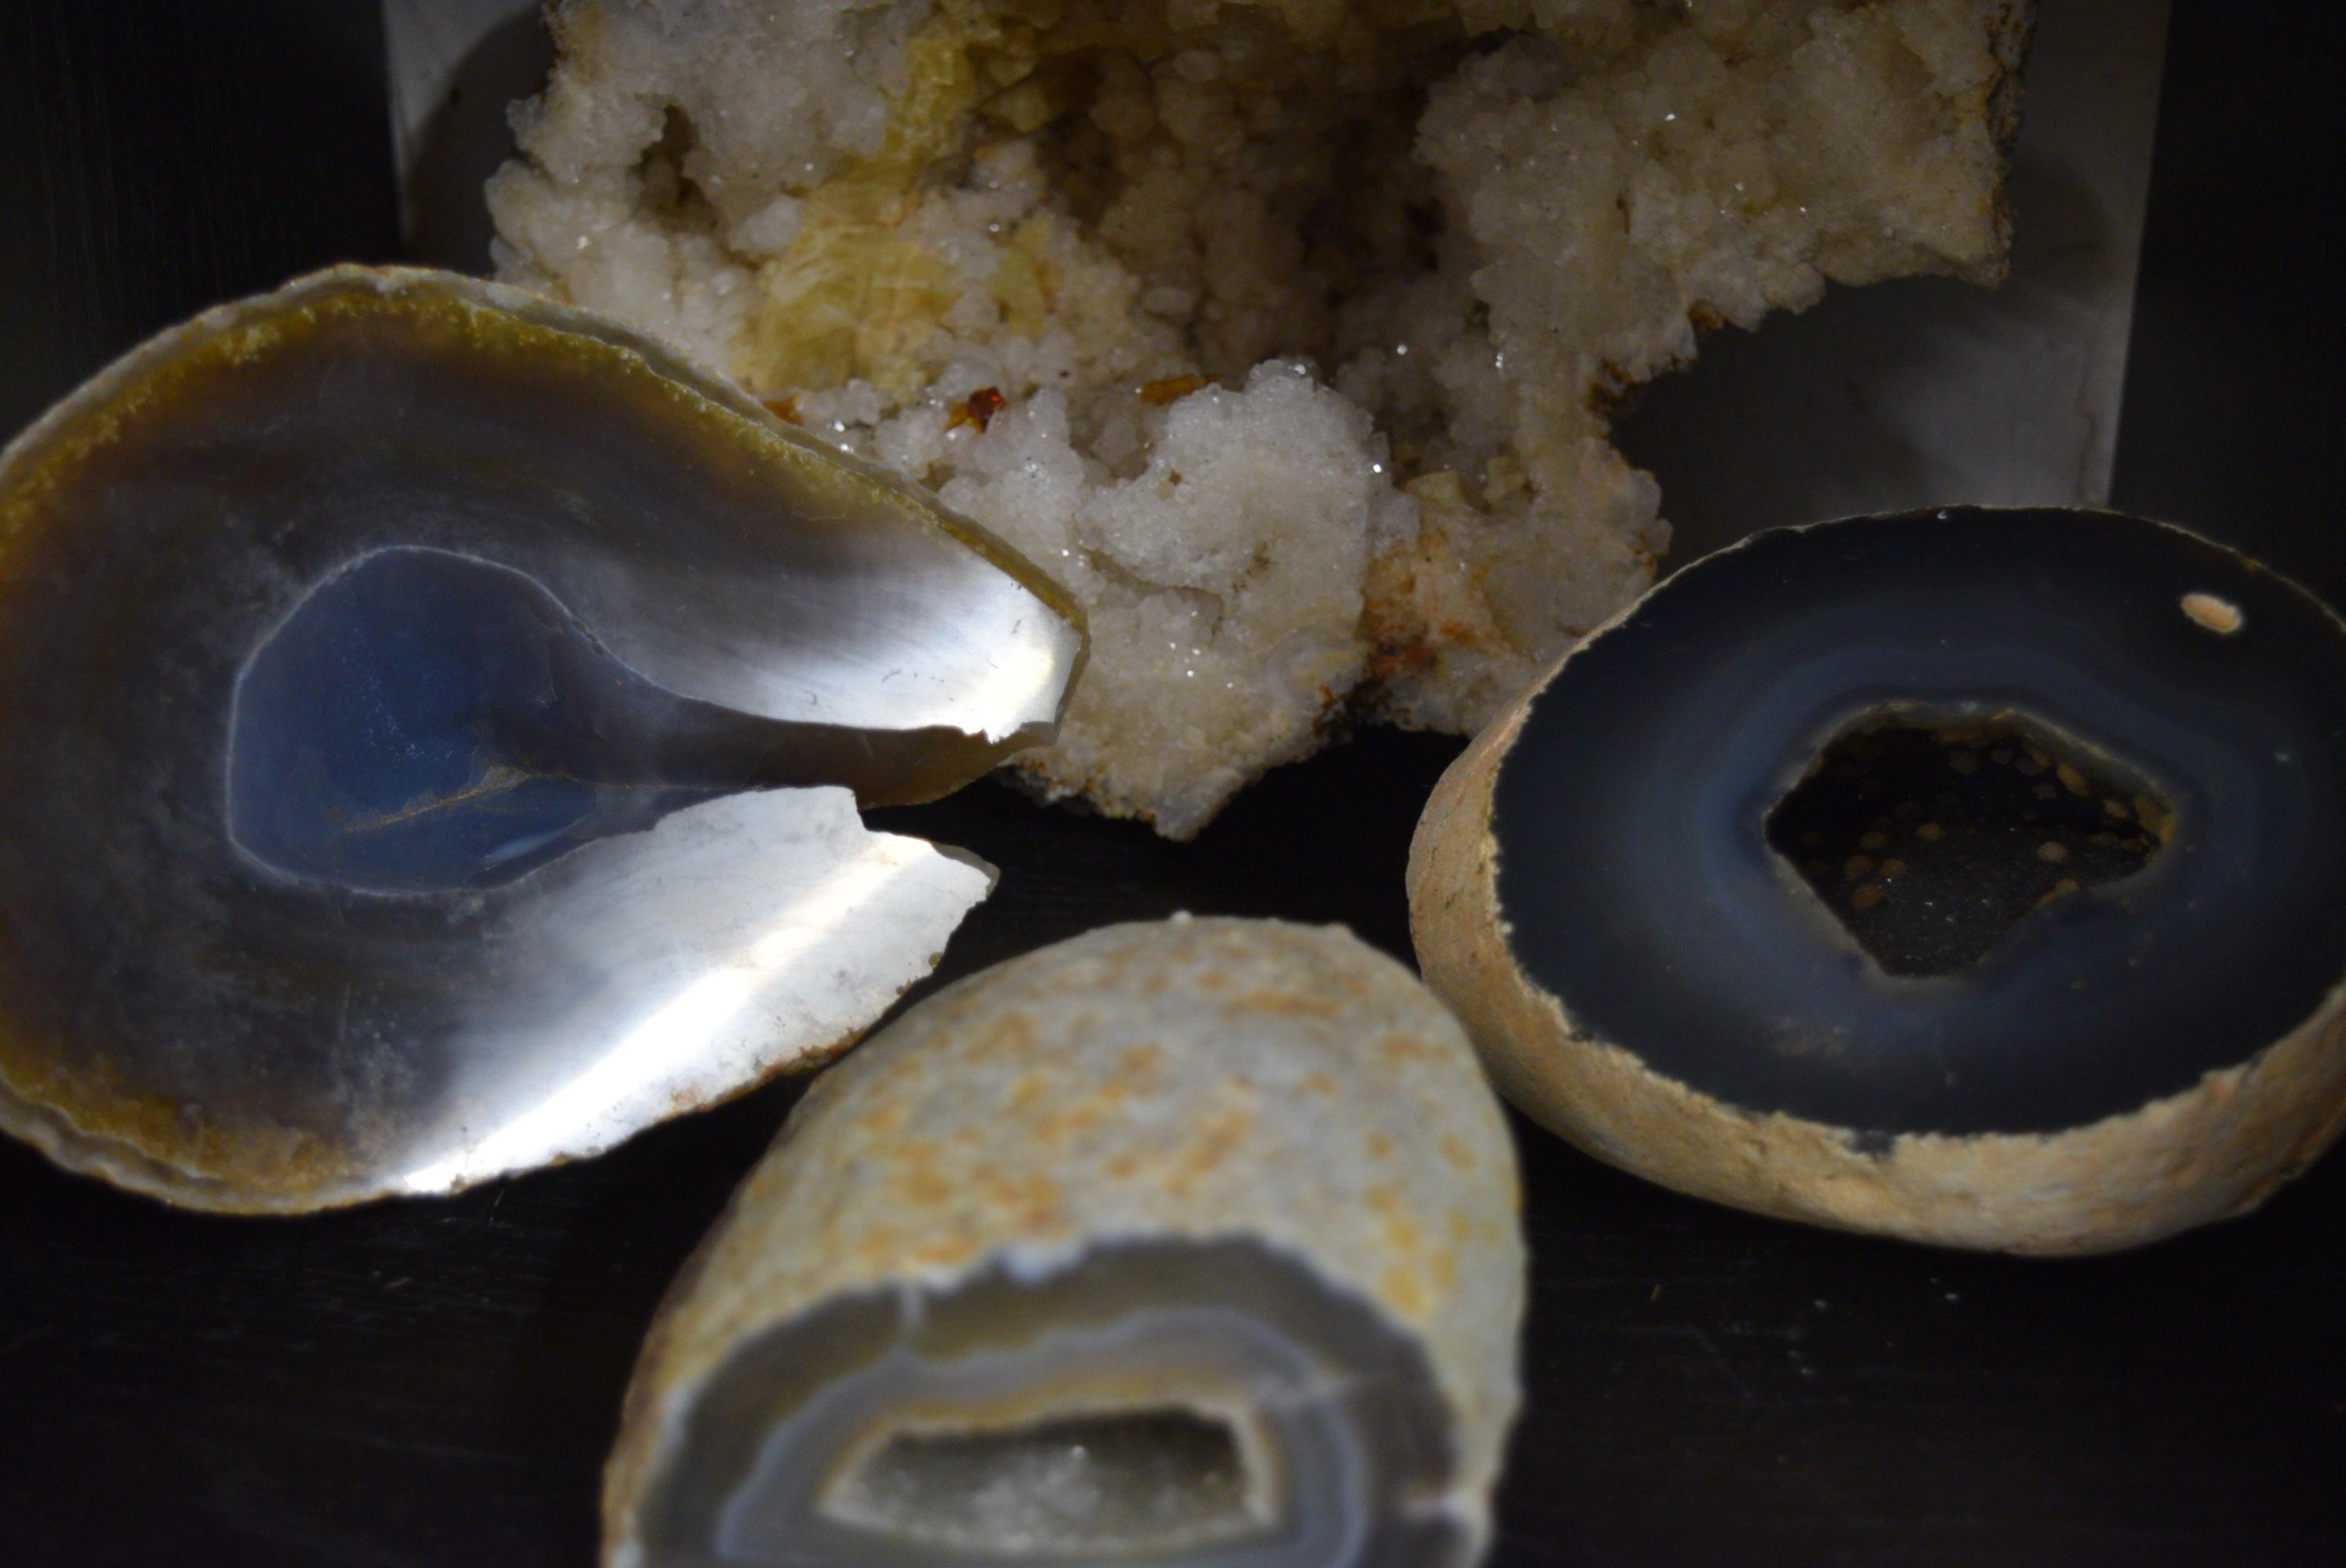 STUNNING GEODES AND AGATE COLLECTION!